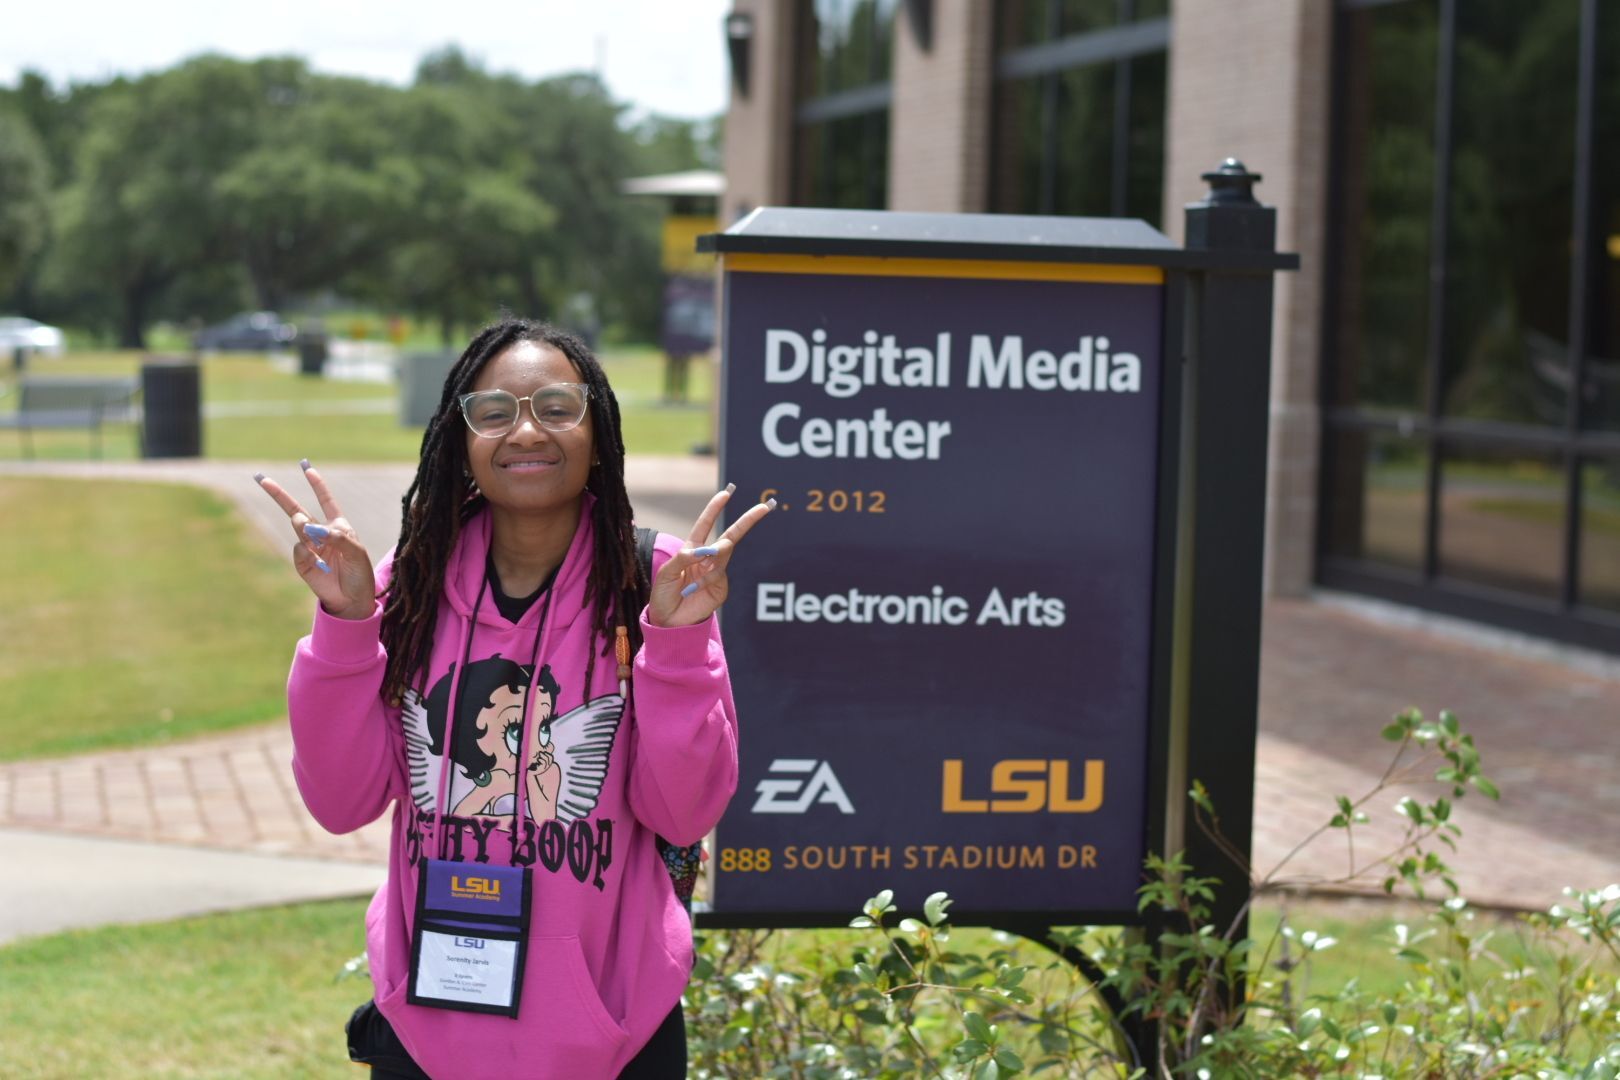 A student for the LSU Summer Academy posing happily with two peace signs in front of the Digital Media Center at LSU